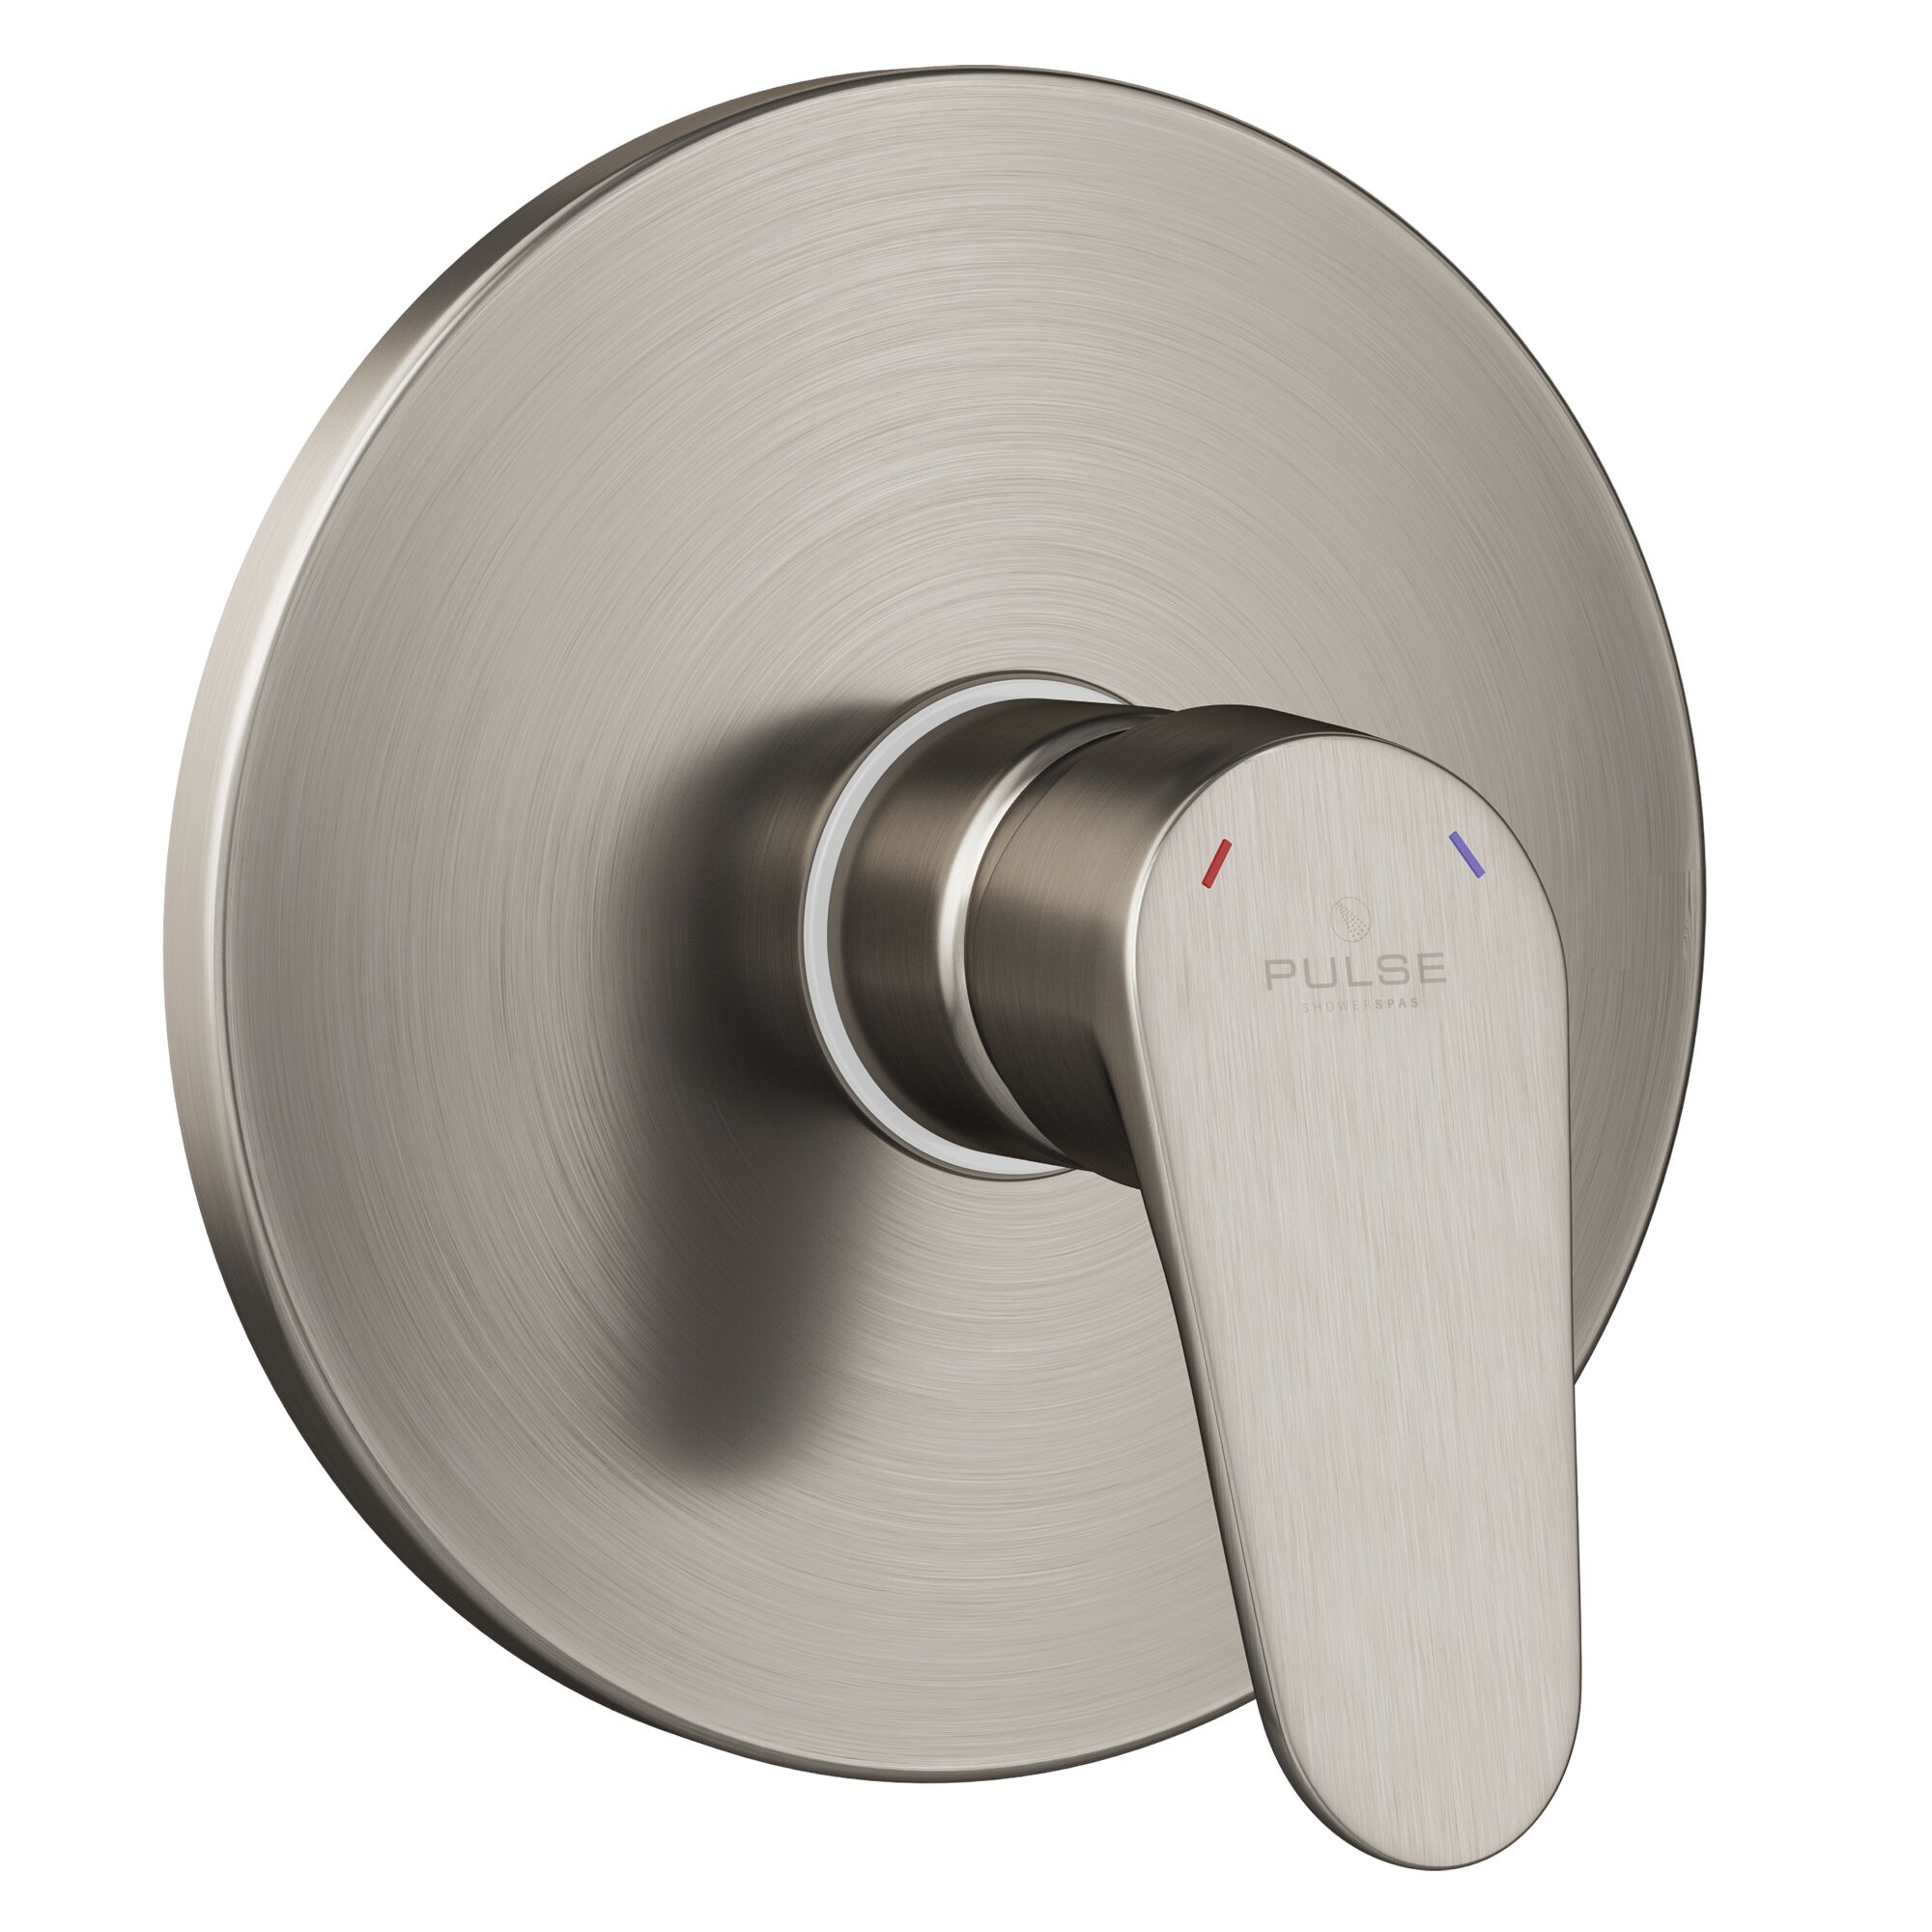 Picture of Pulse ShowerSpas 3001-RIV-PB-BN 0.5 in. Tru-Temp Pressure Balance Rough-In Valve with Brushed Nickel Trim Kit